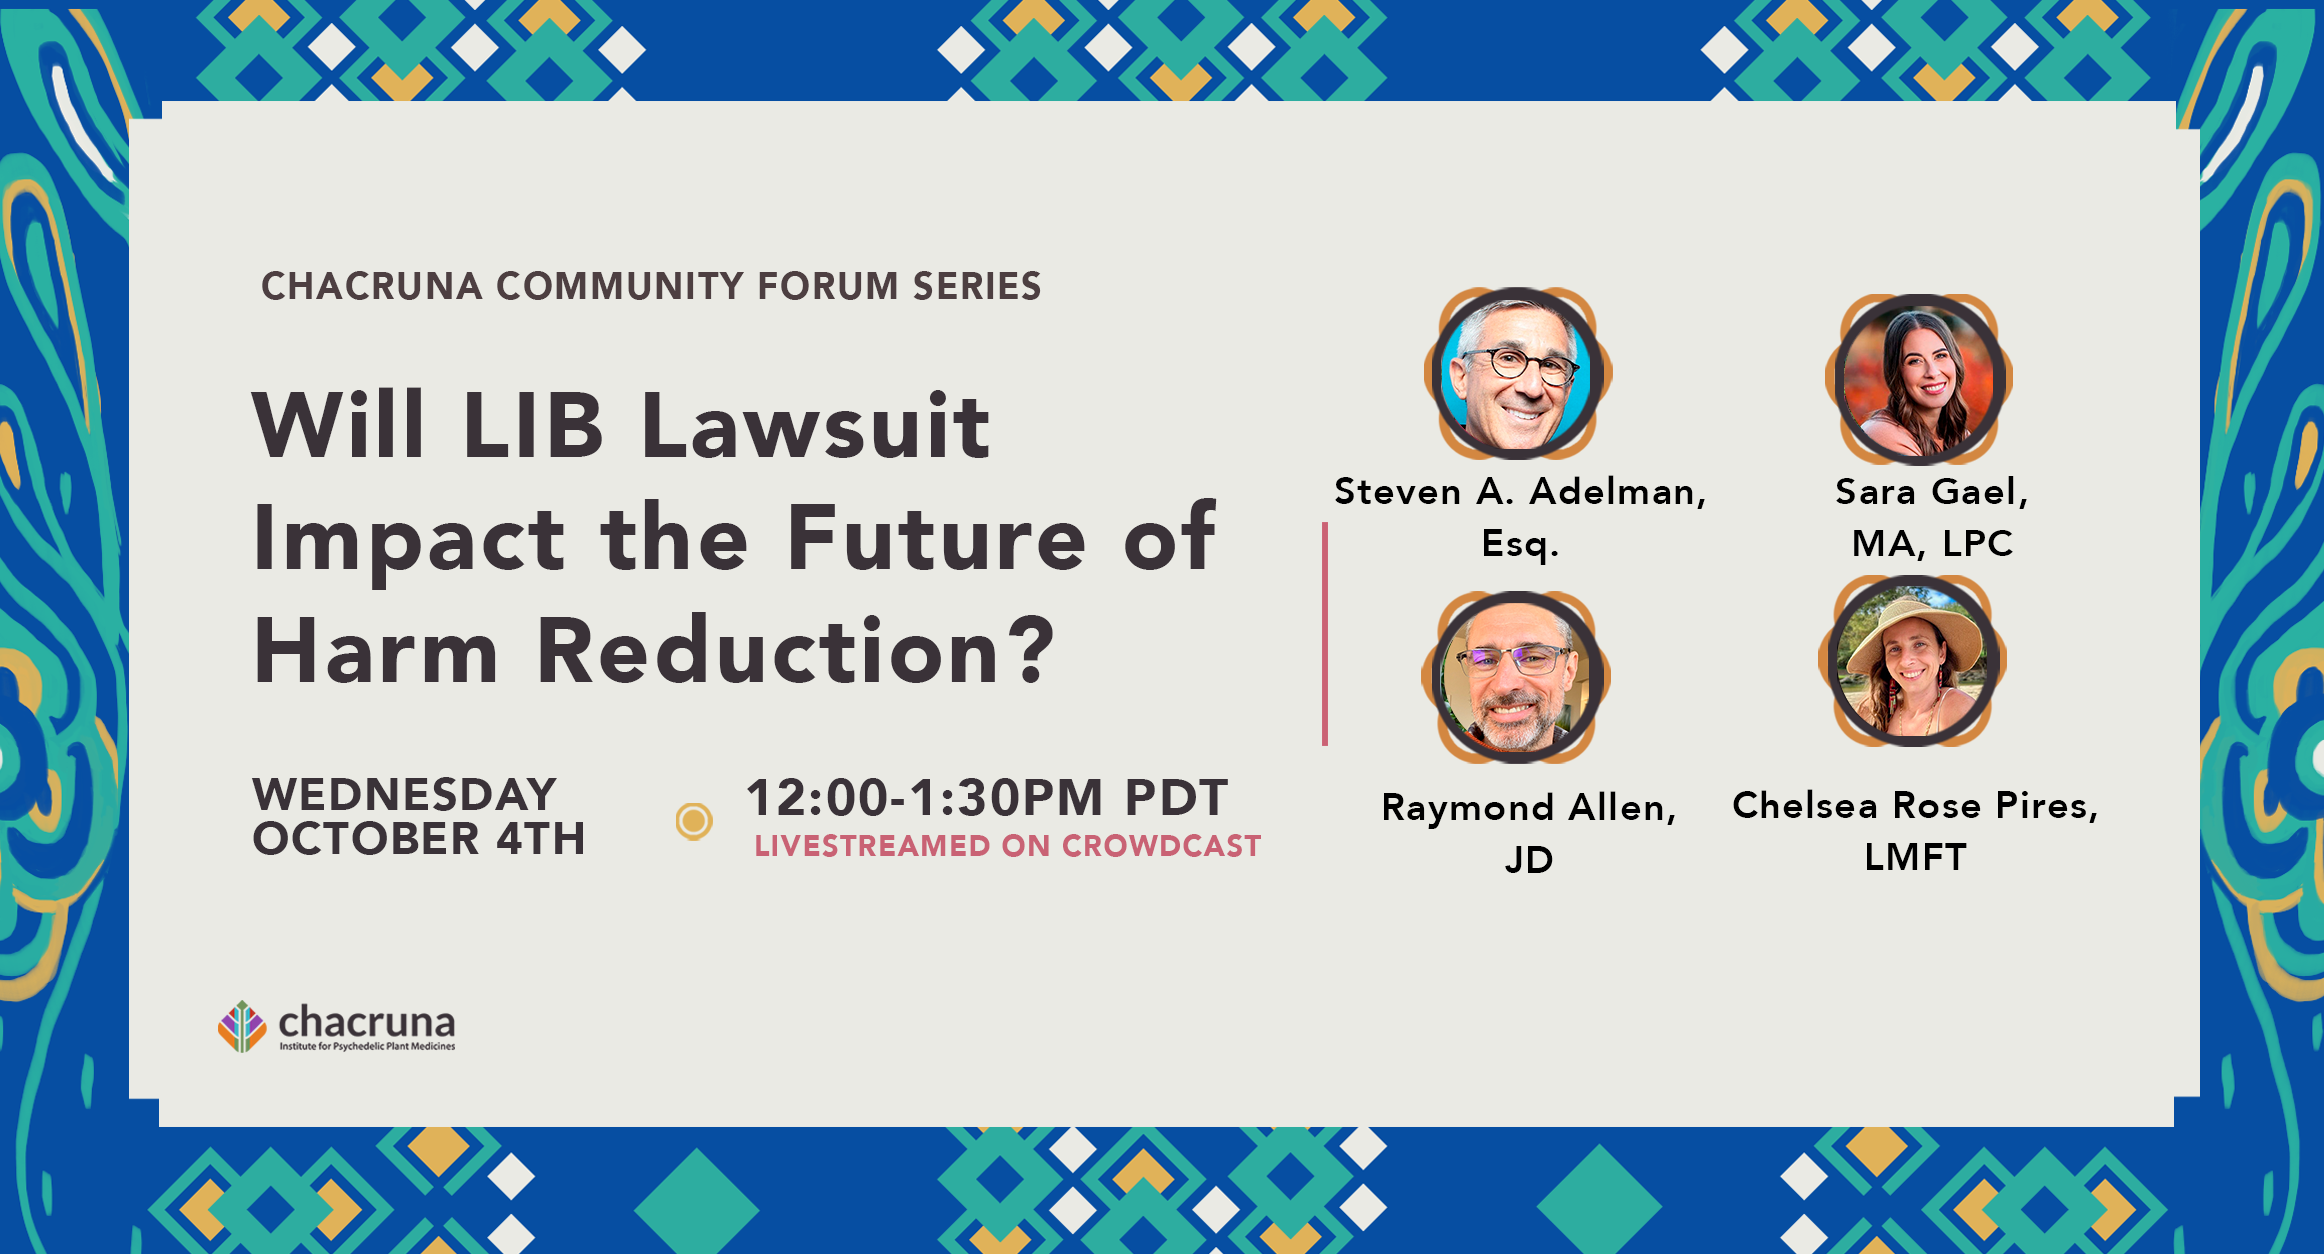 Will LIB Lawsuit Impact the Future of Harm Reduction? event cover photo